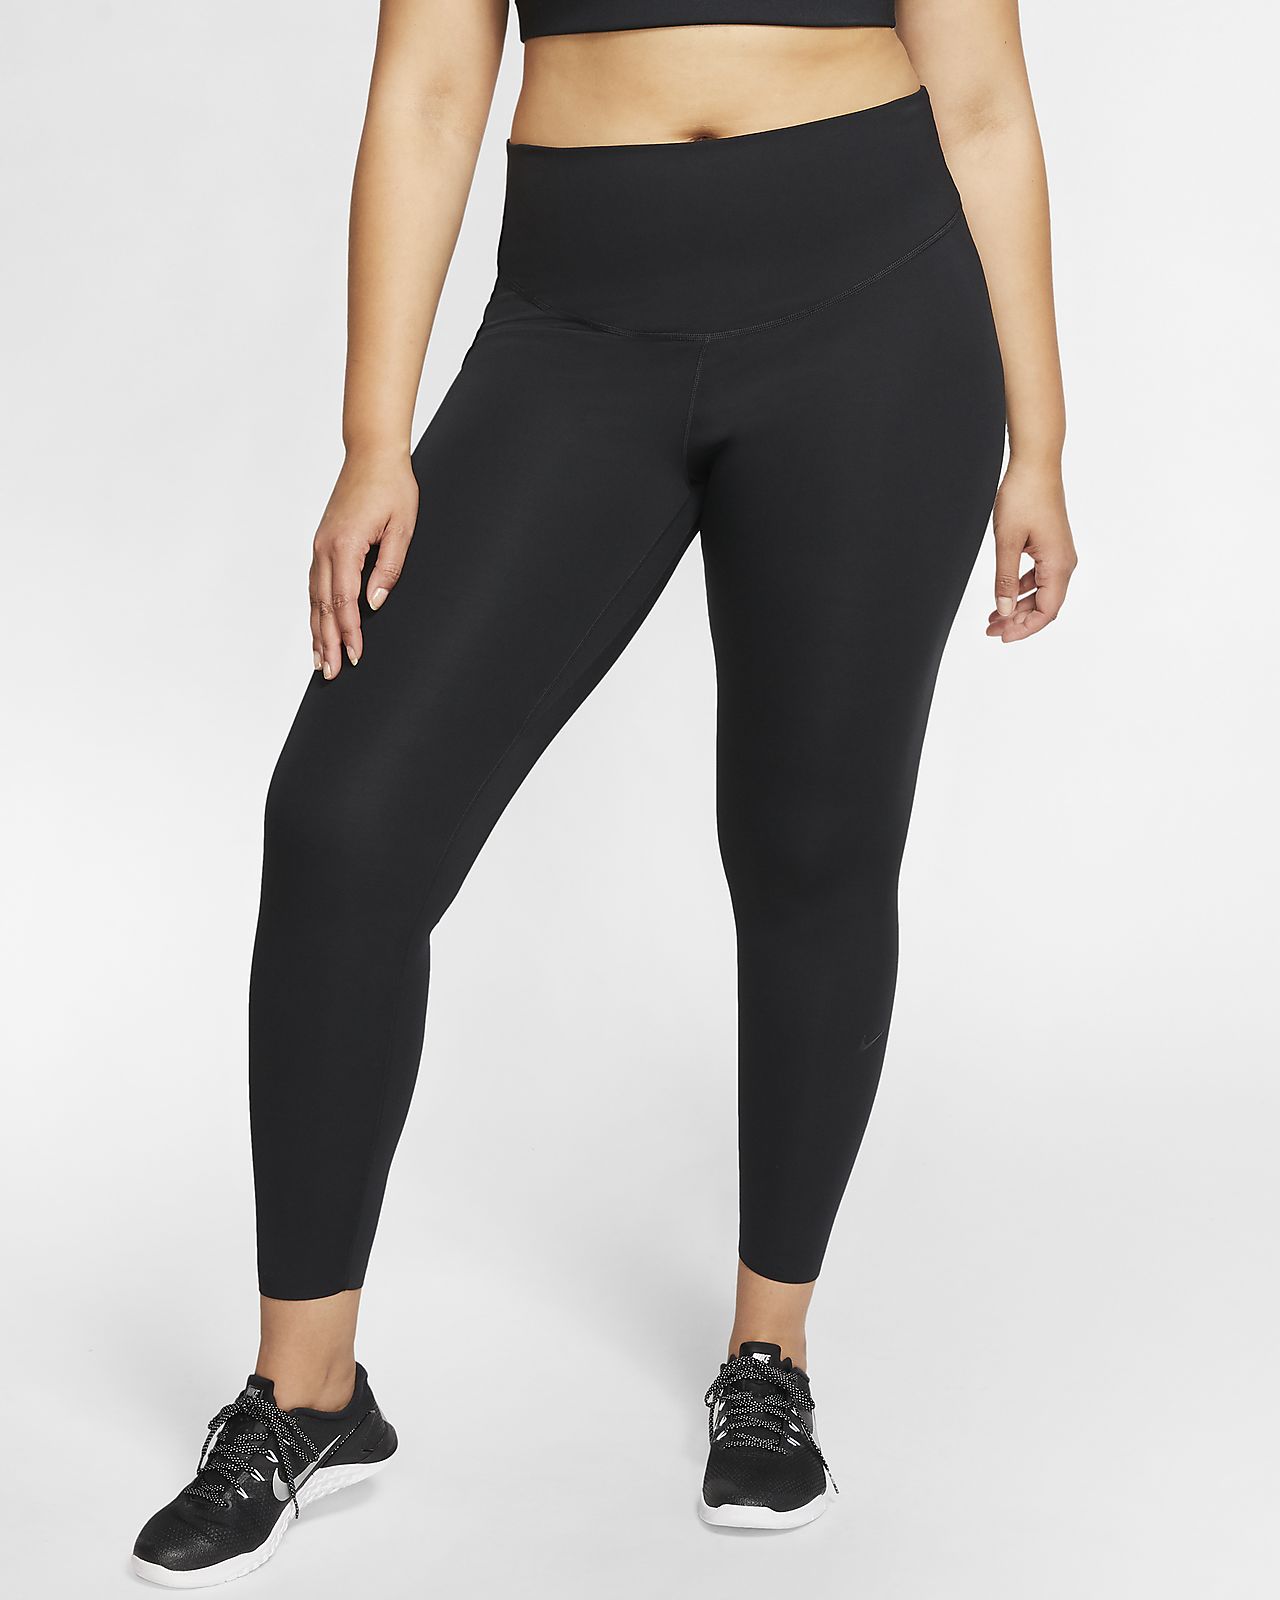 Nike One Luxe Women's Tights (Plus Size 